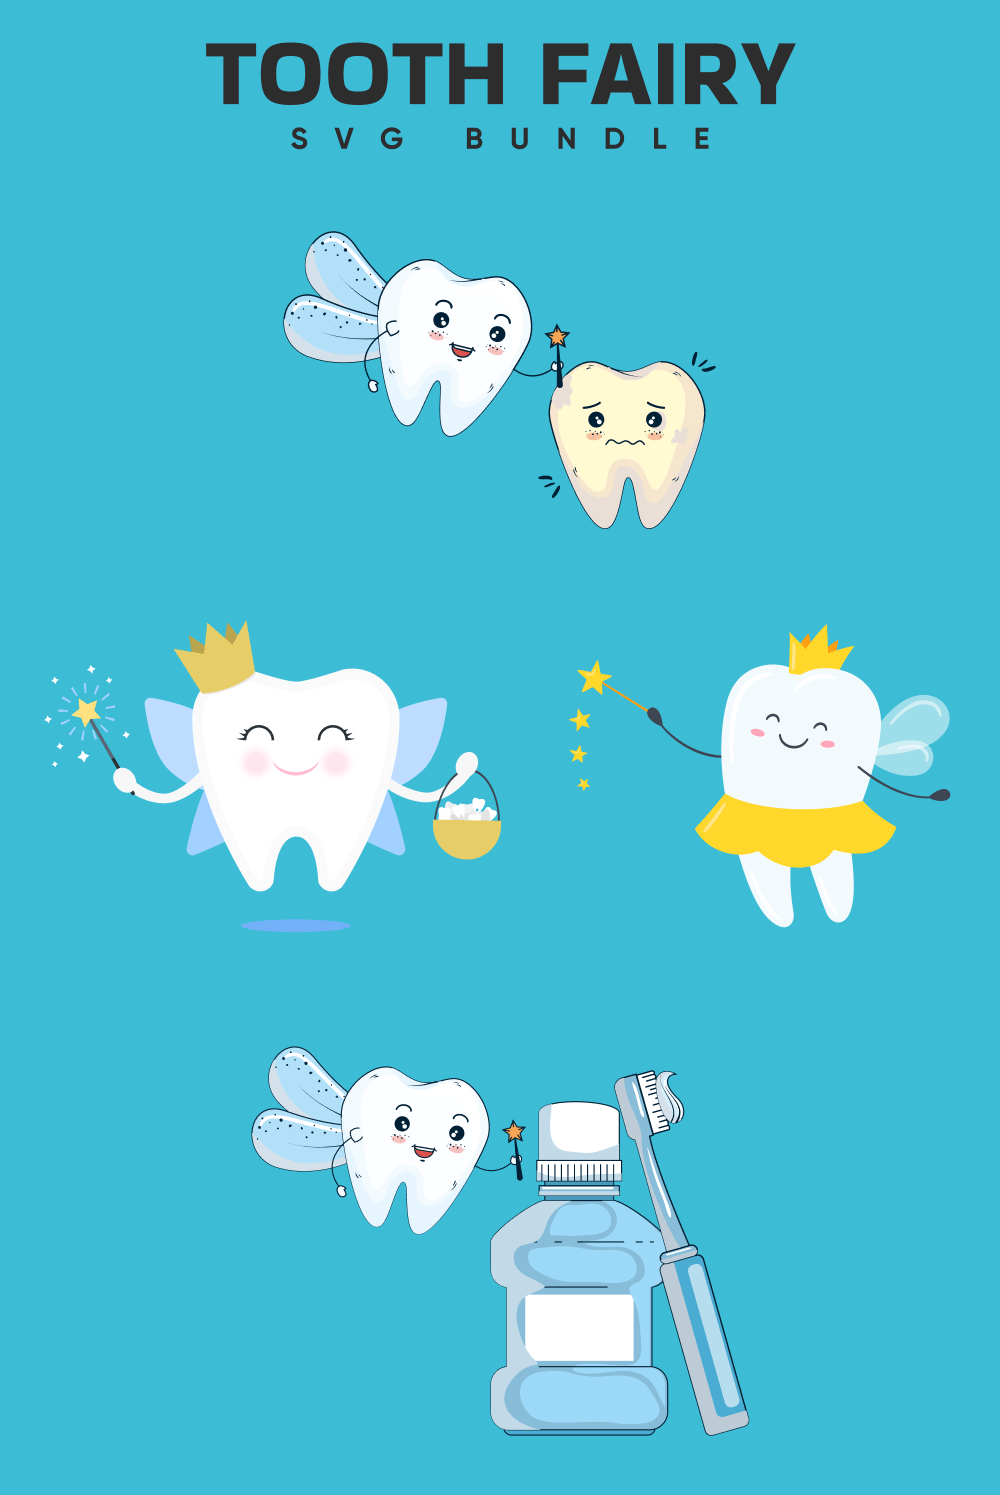 Five tooth fairies in the form of teeth.